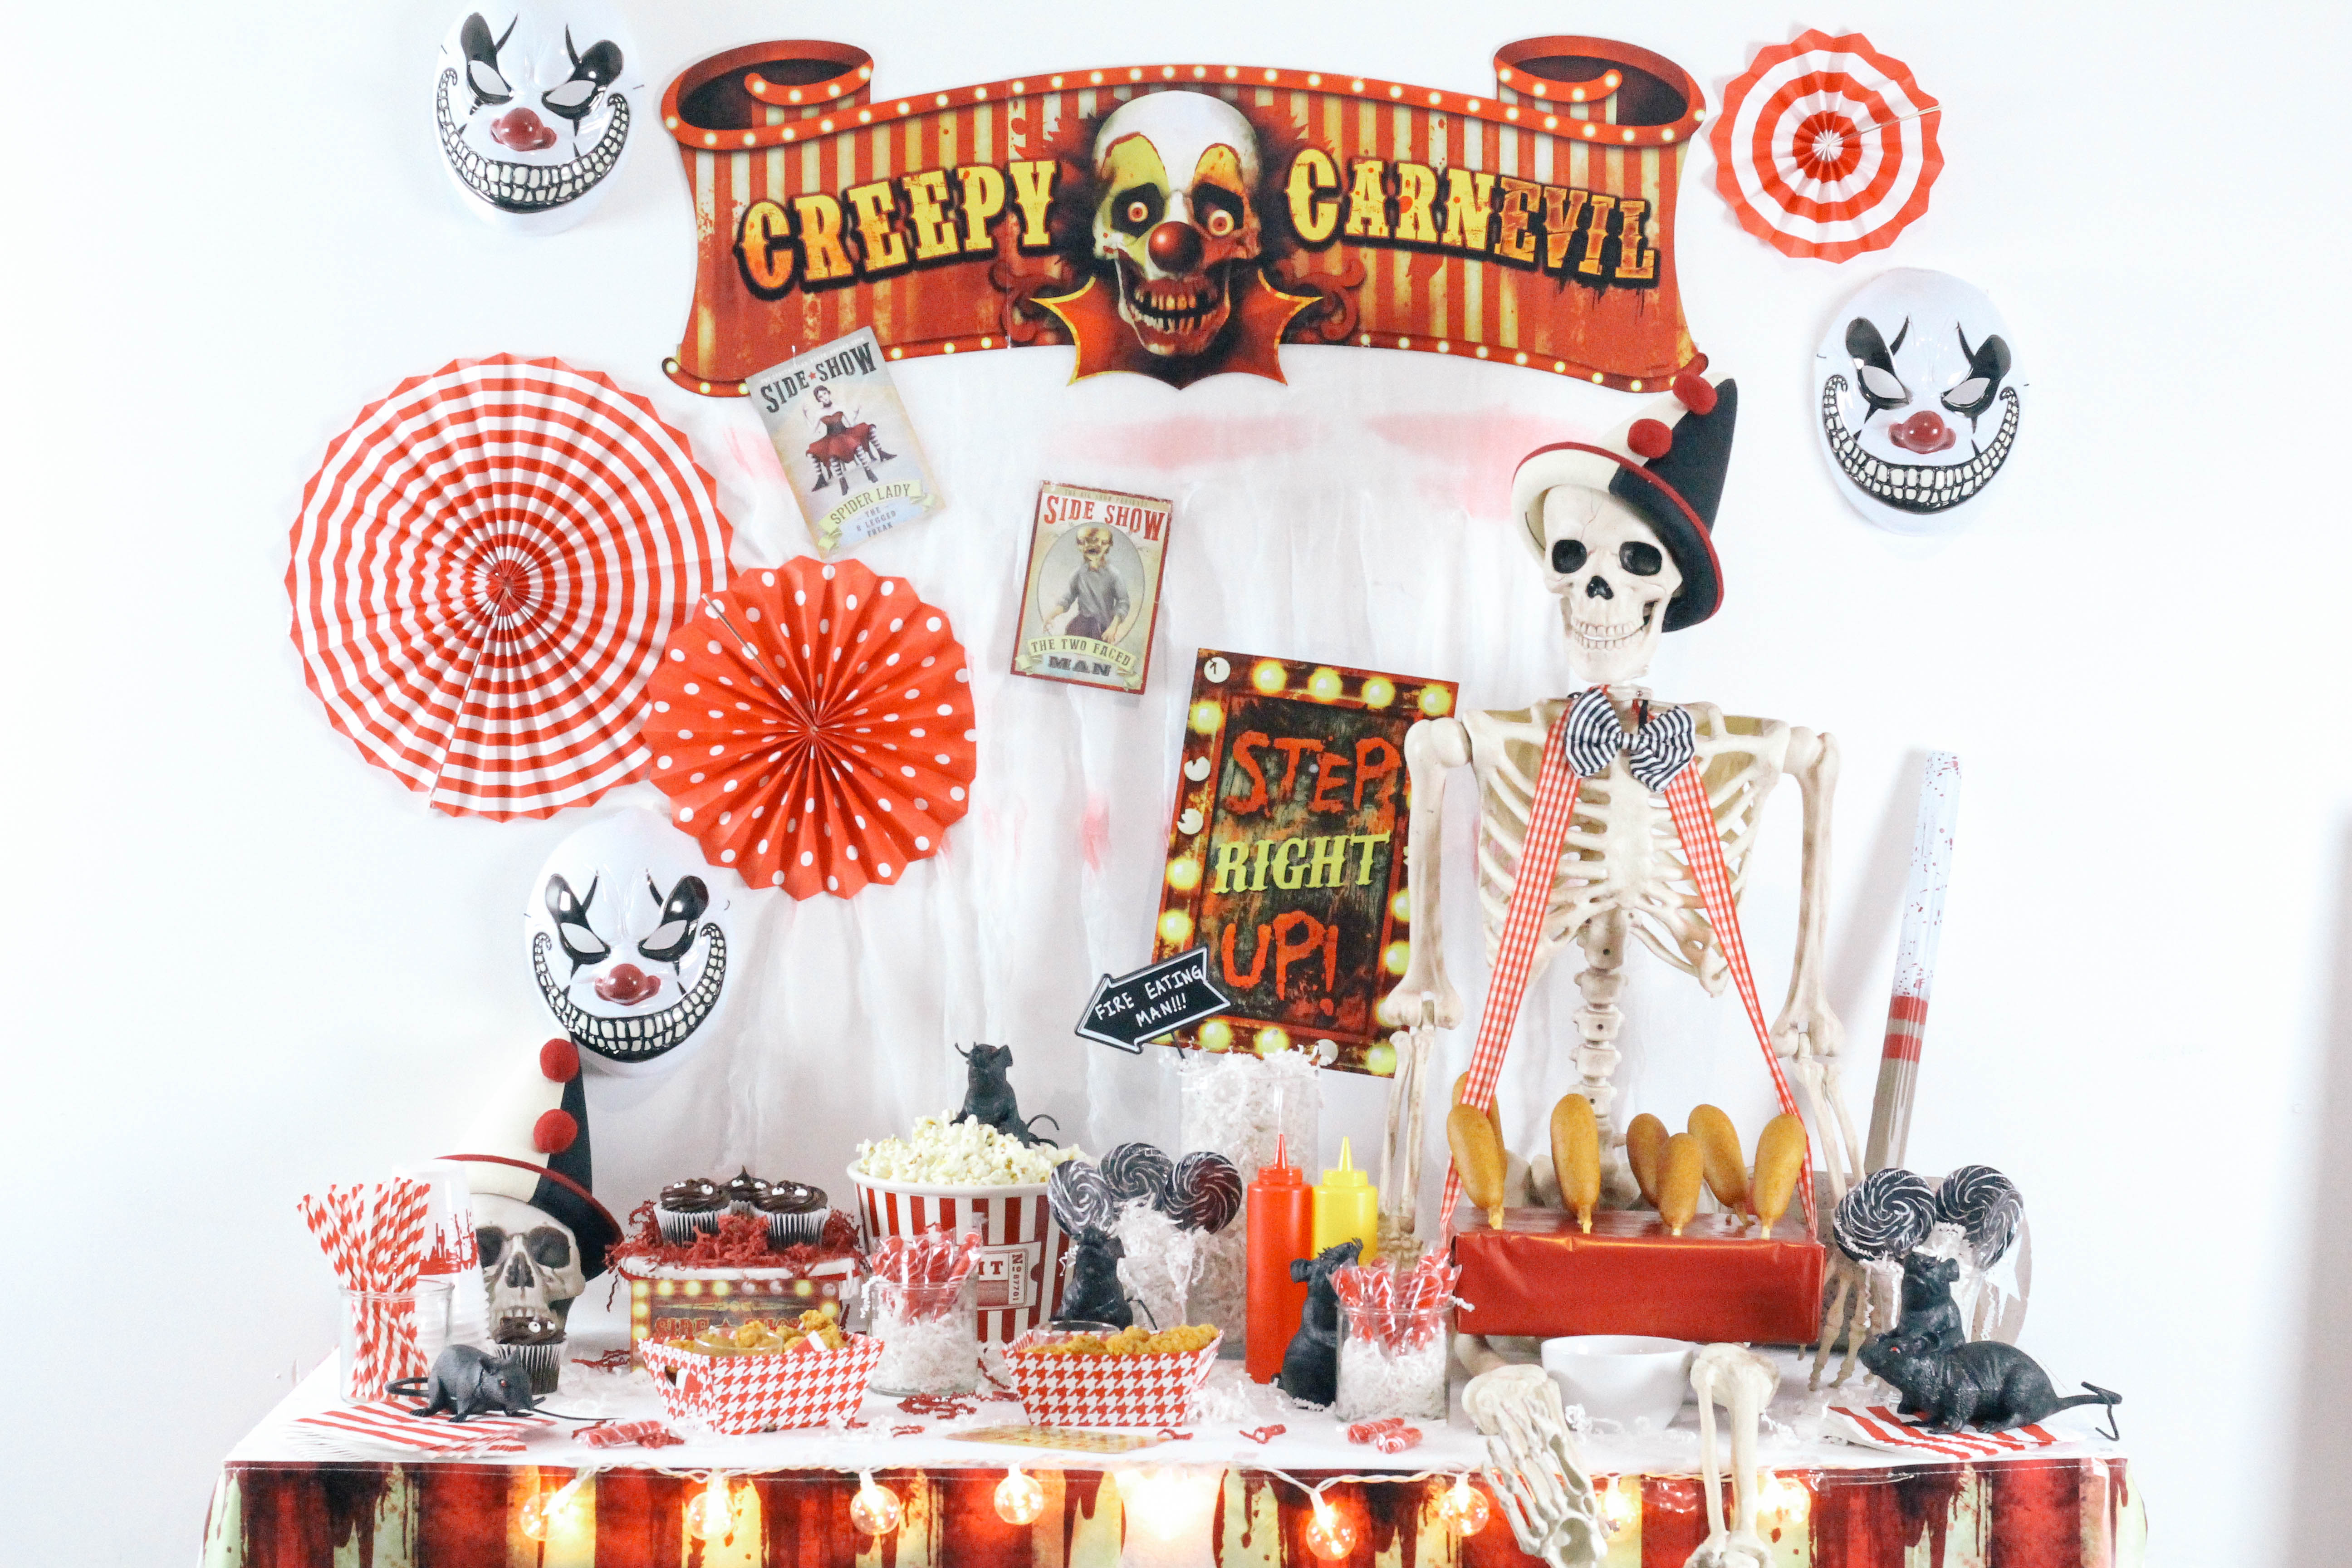 Halloween-Carnival-CarnEVIL-themed-party-tablescape-2